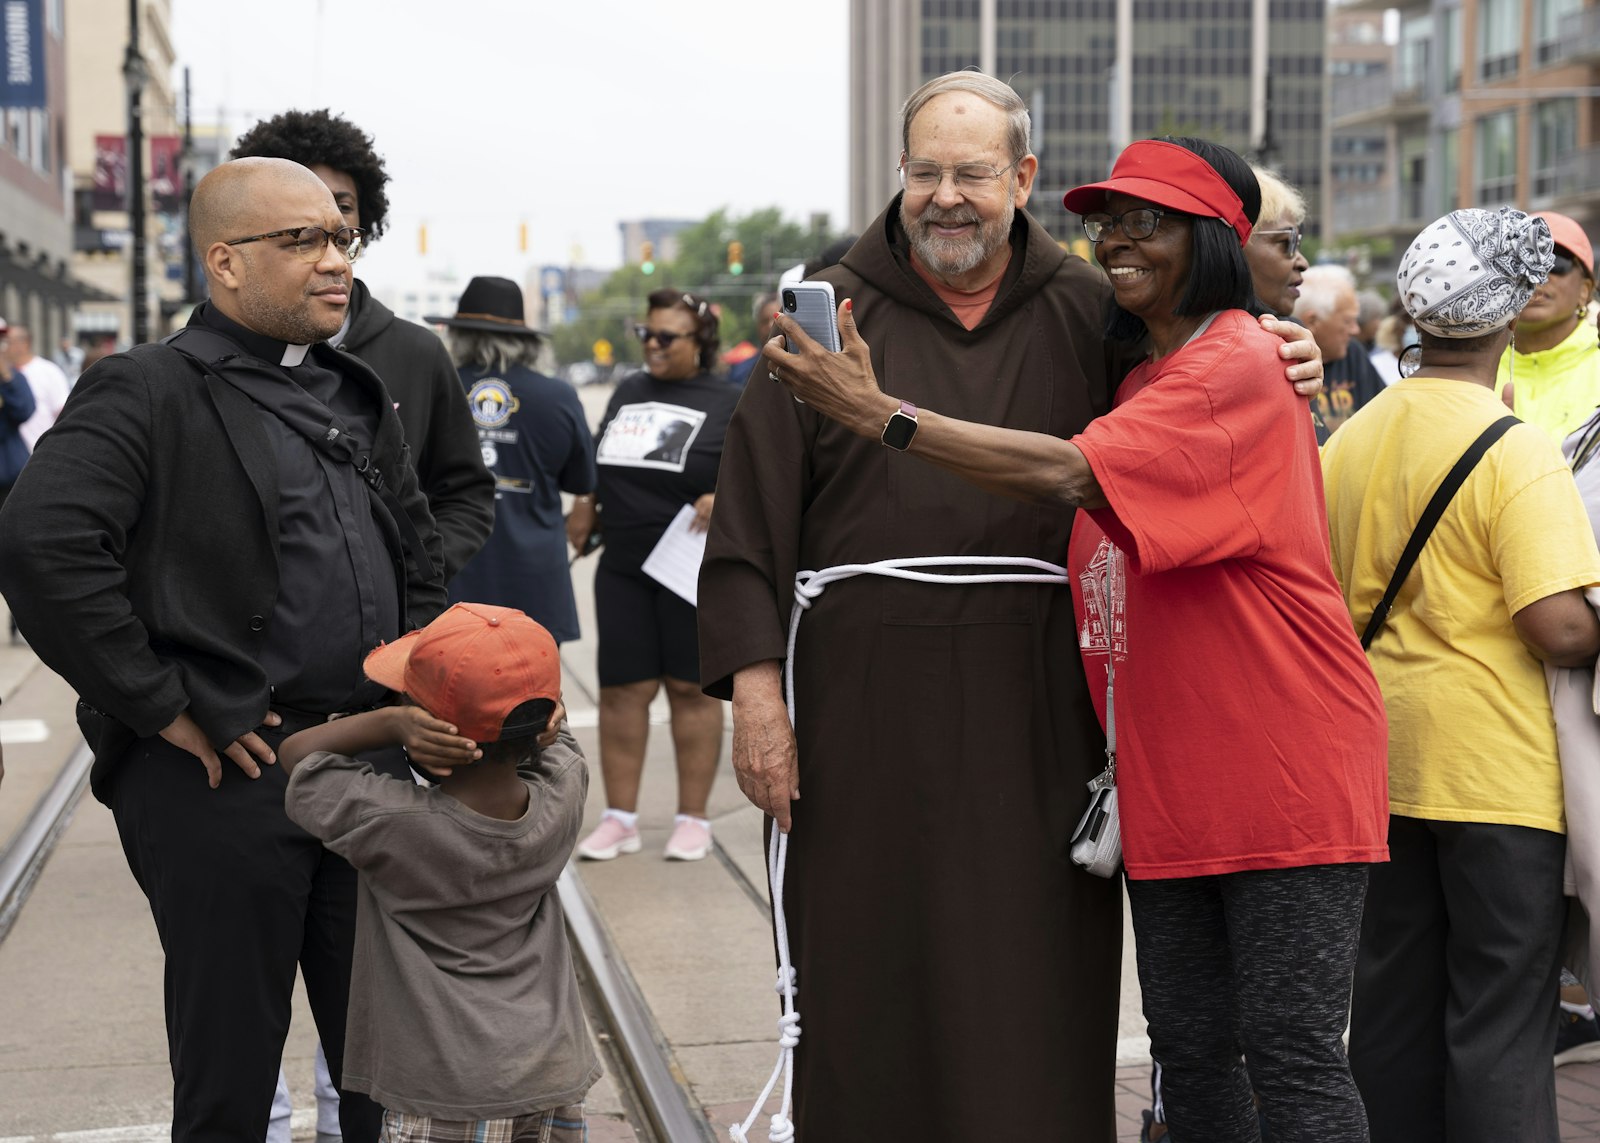 Several Catholics led by Msgr. Chuck Kosanke first gathered down the street at the former St. Patrick’s Church before joining the rest of the crowd. At left is Fr. John McKenzie, along with Capuchin Fr. David Preuss.